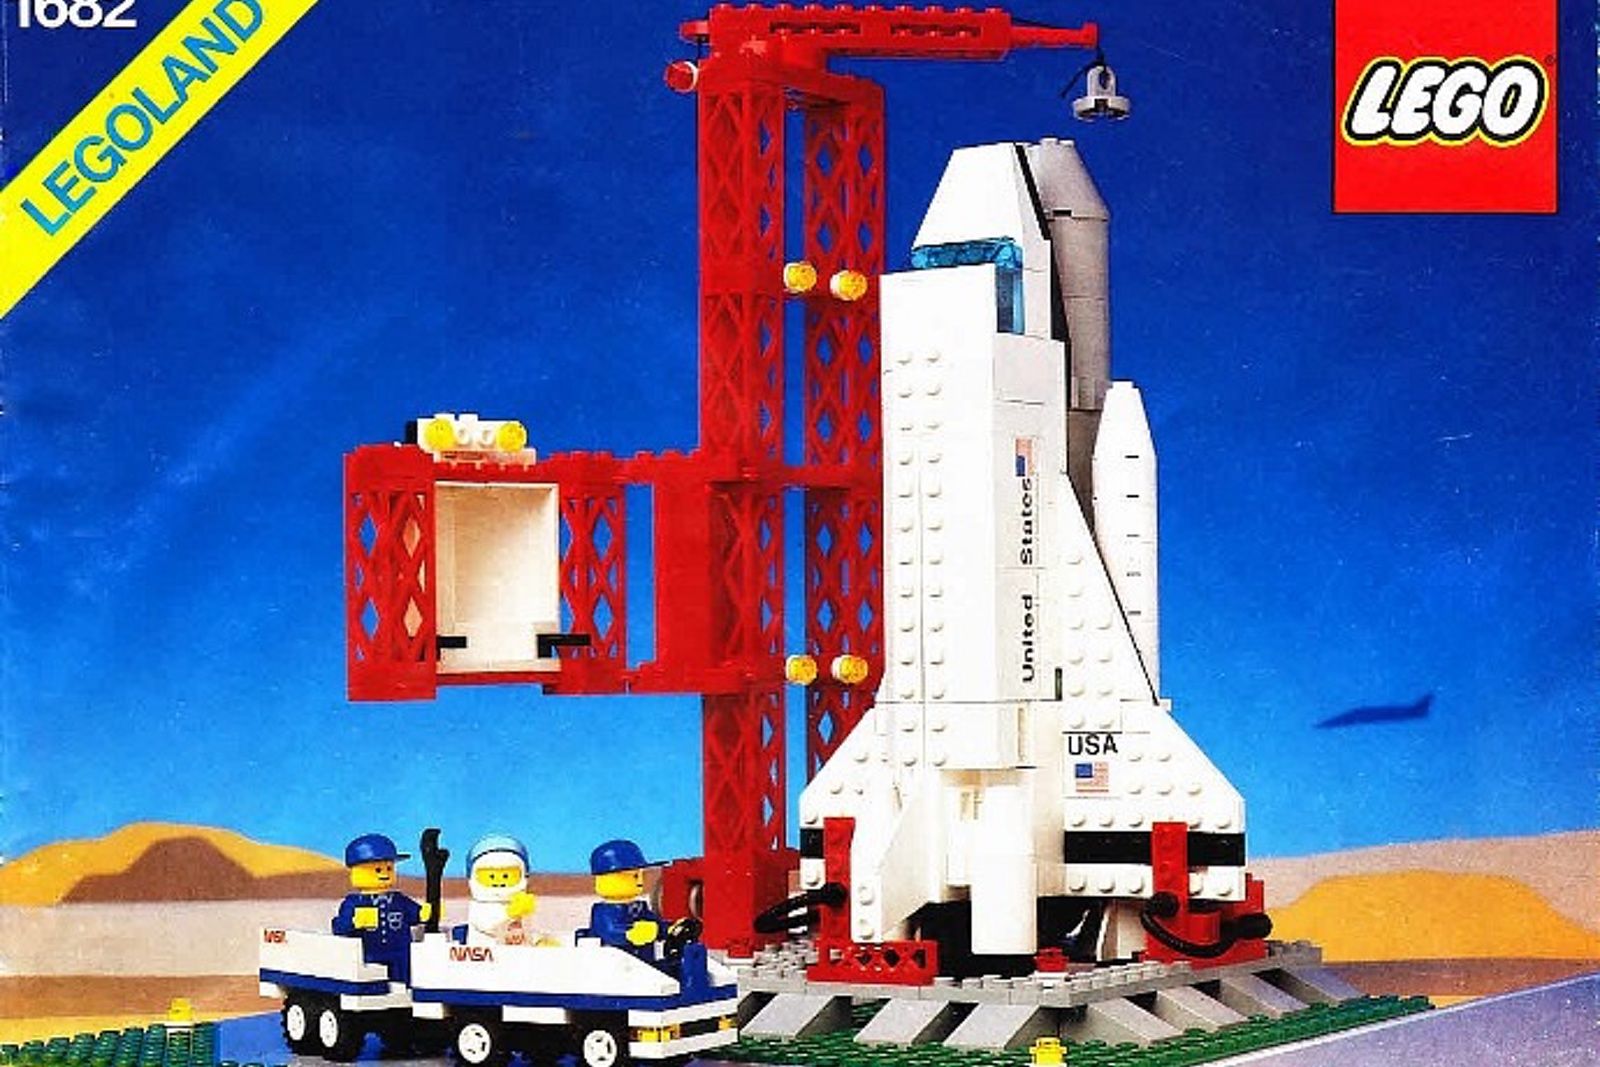 Remember These The Best Lego Sets Of All Time image 133